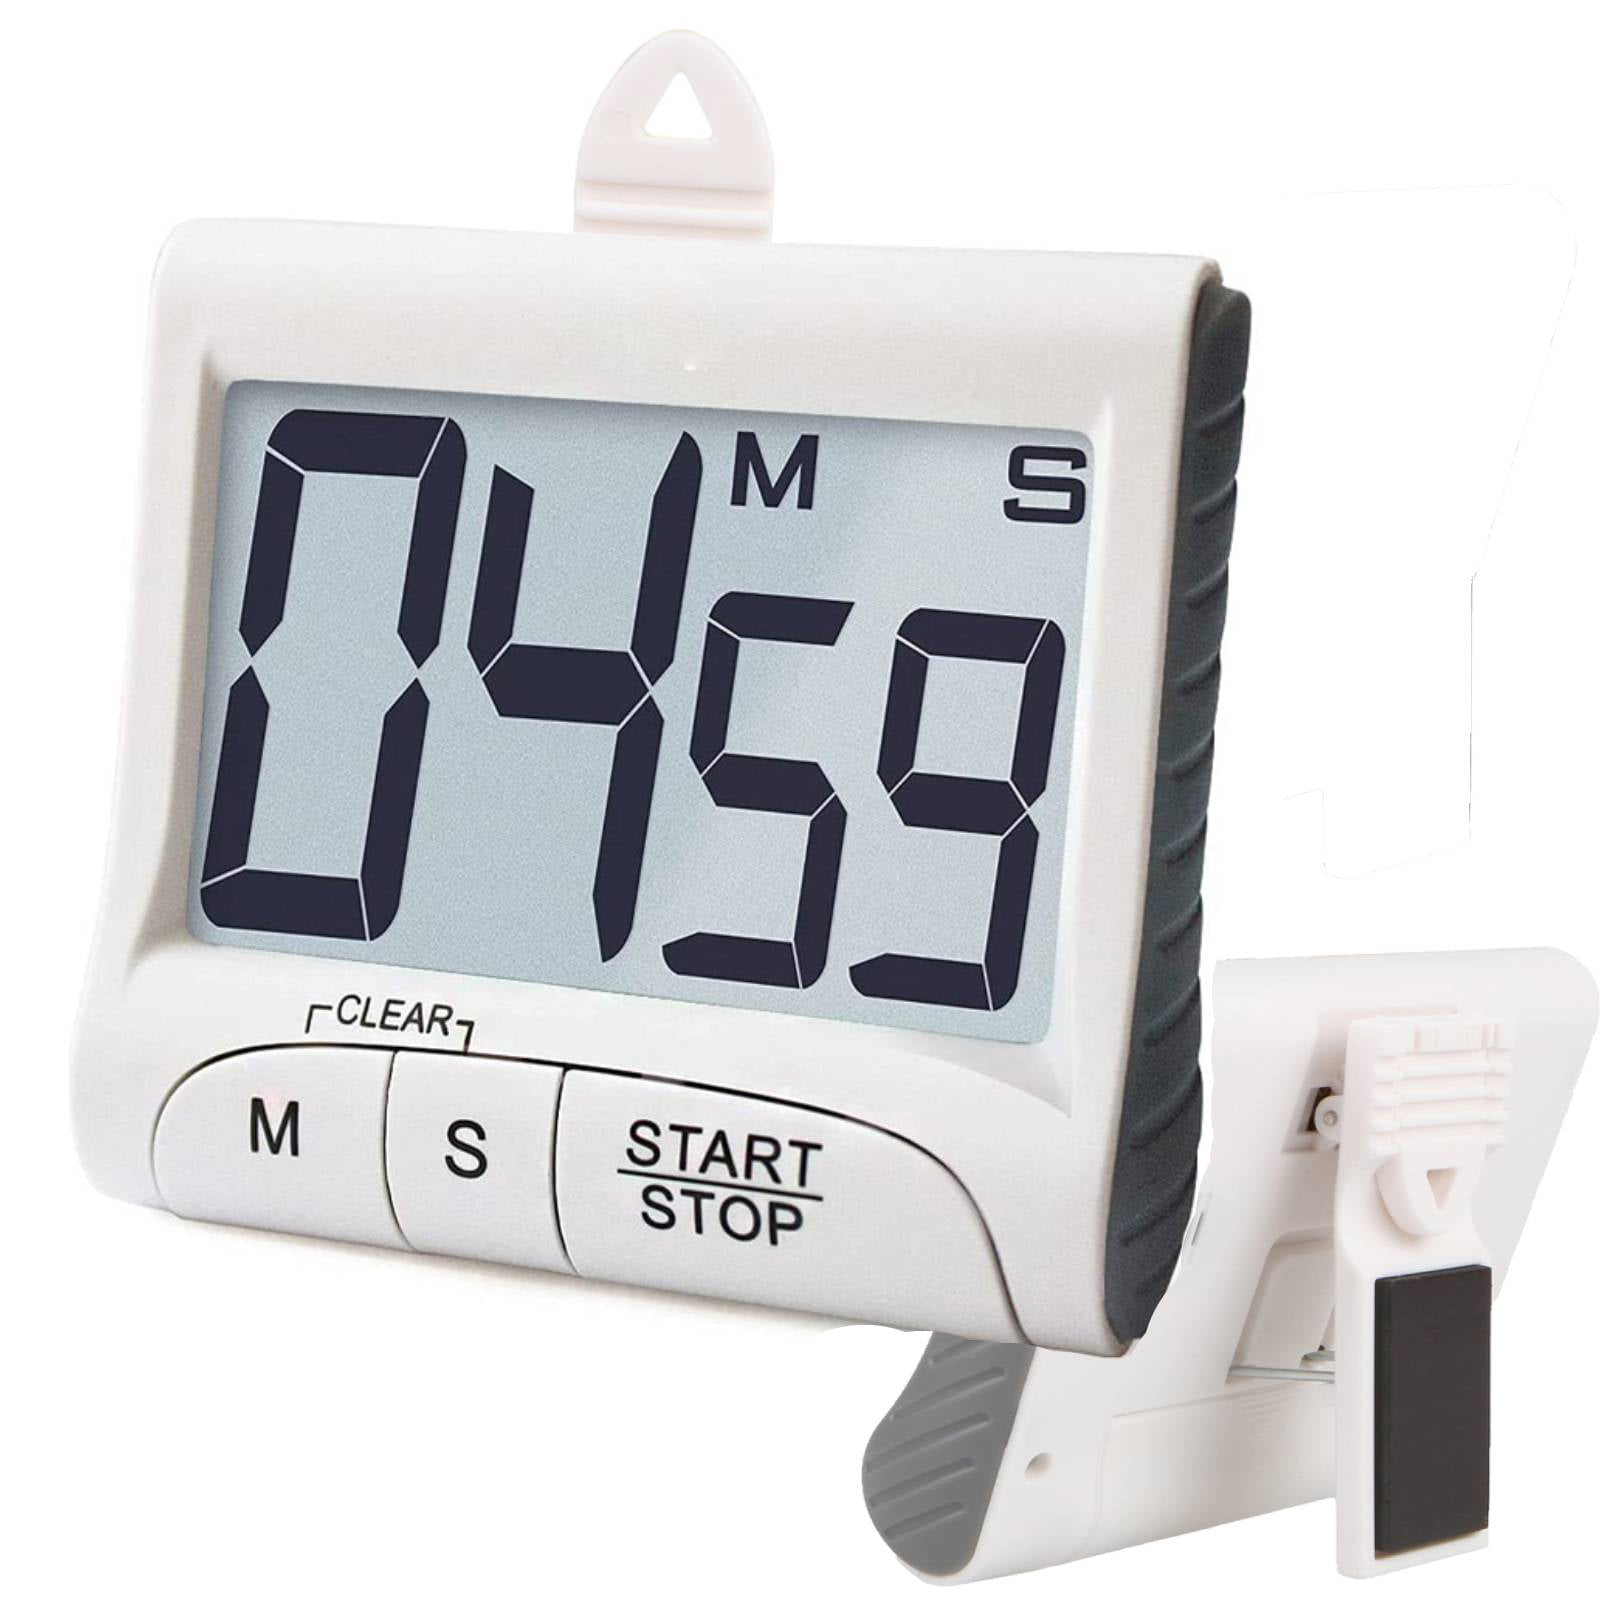 White LCD Digital Kitchen Cooking Timer Count-Down Up Clock Loud Alarm Magnetic